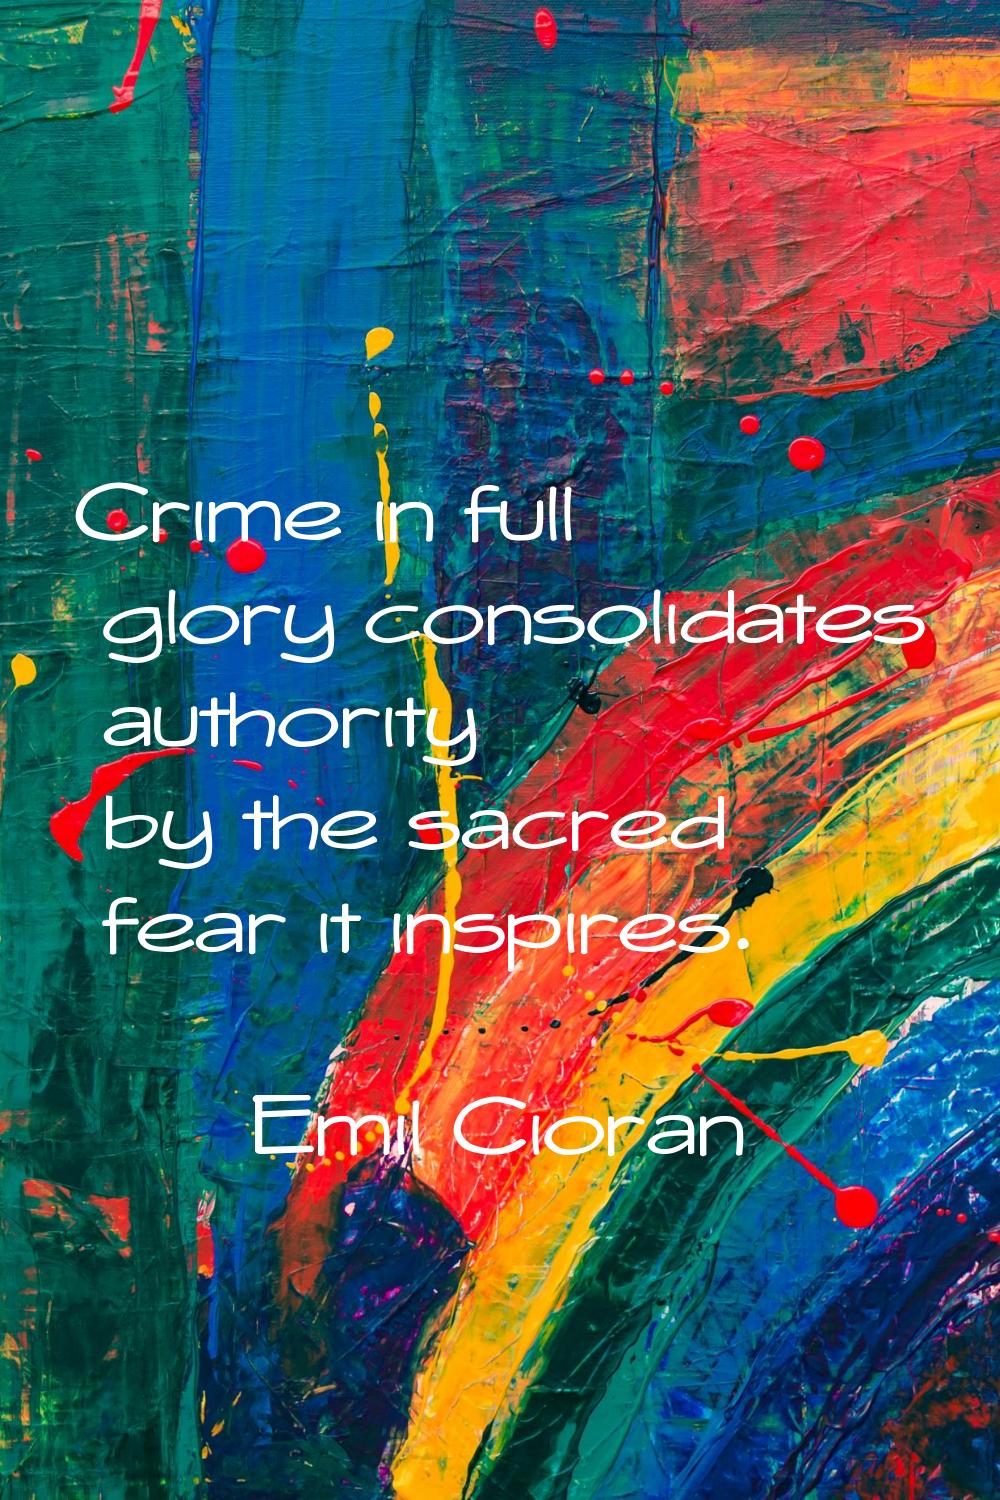 Crime in full glory consolidates authority by the sacred fear it inspires.